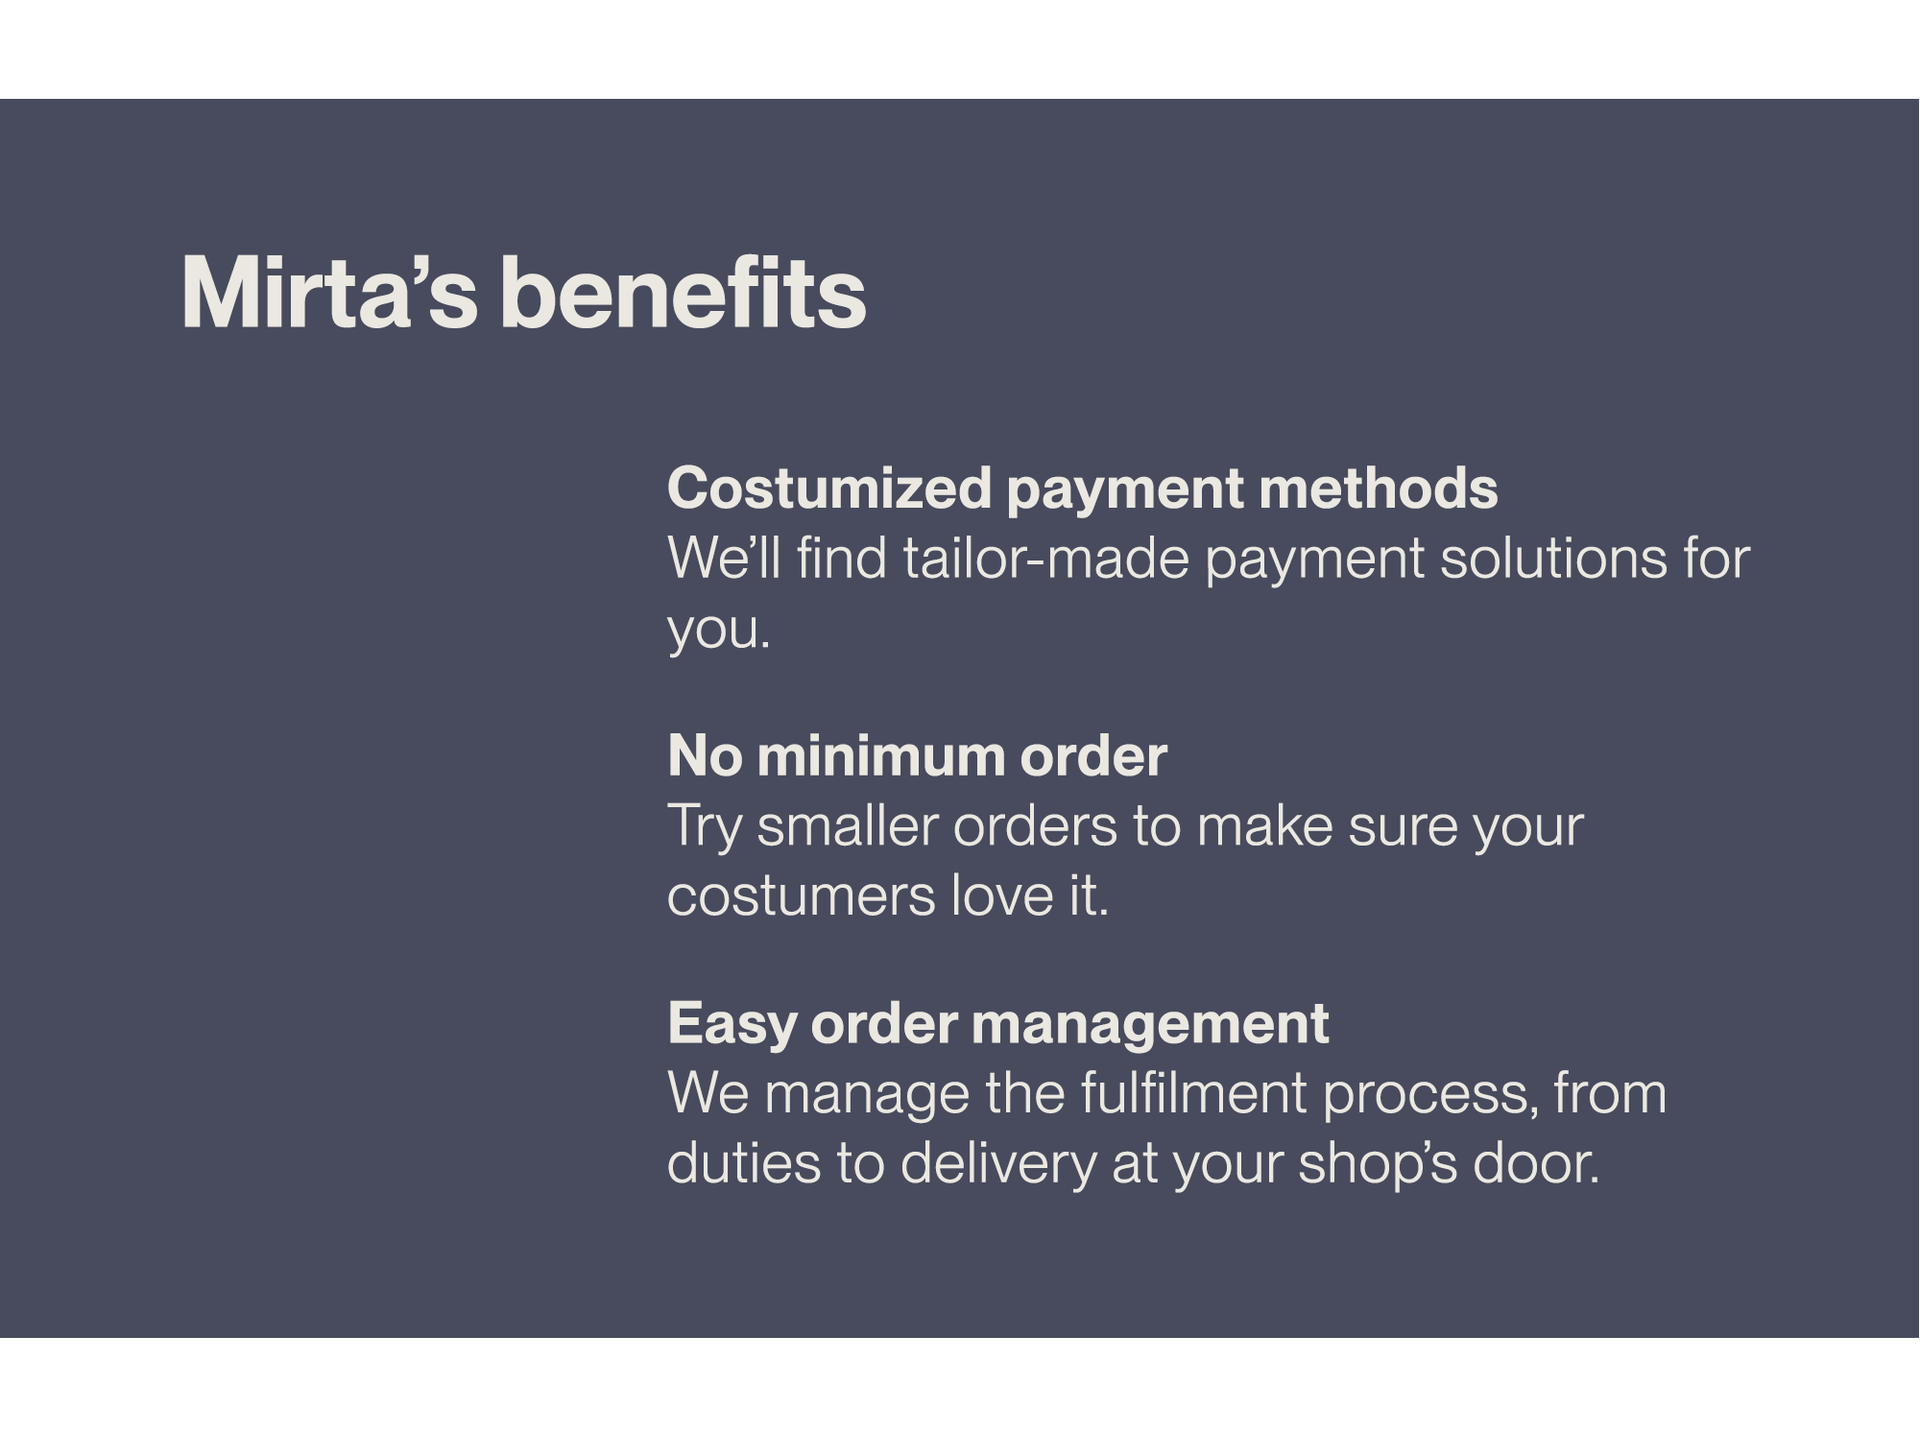 Mirta's benefits (customized payment methods, no minimum order, easy order management)